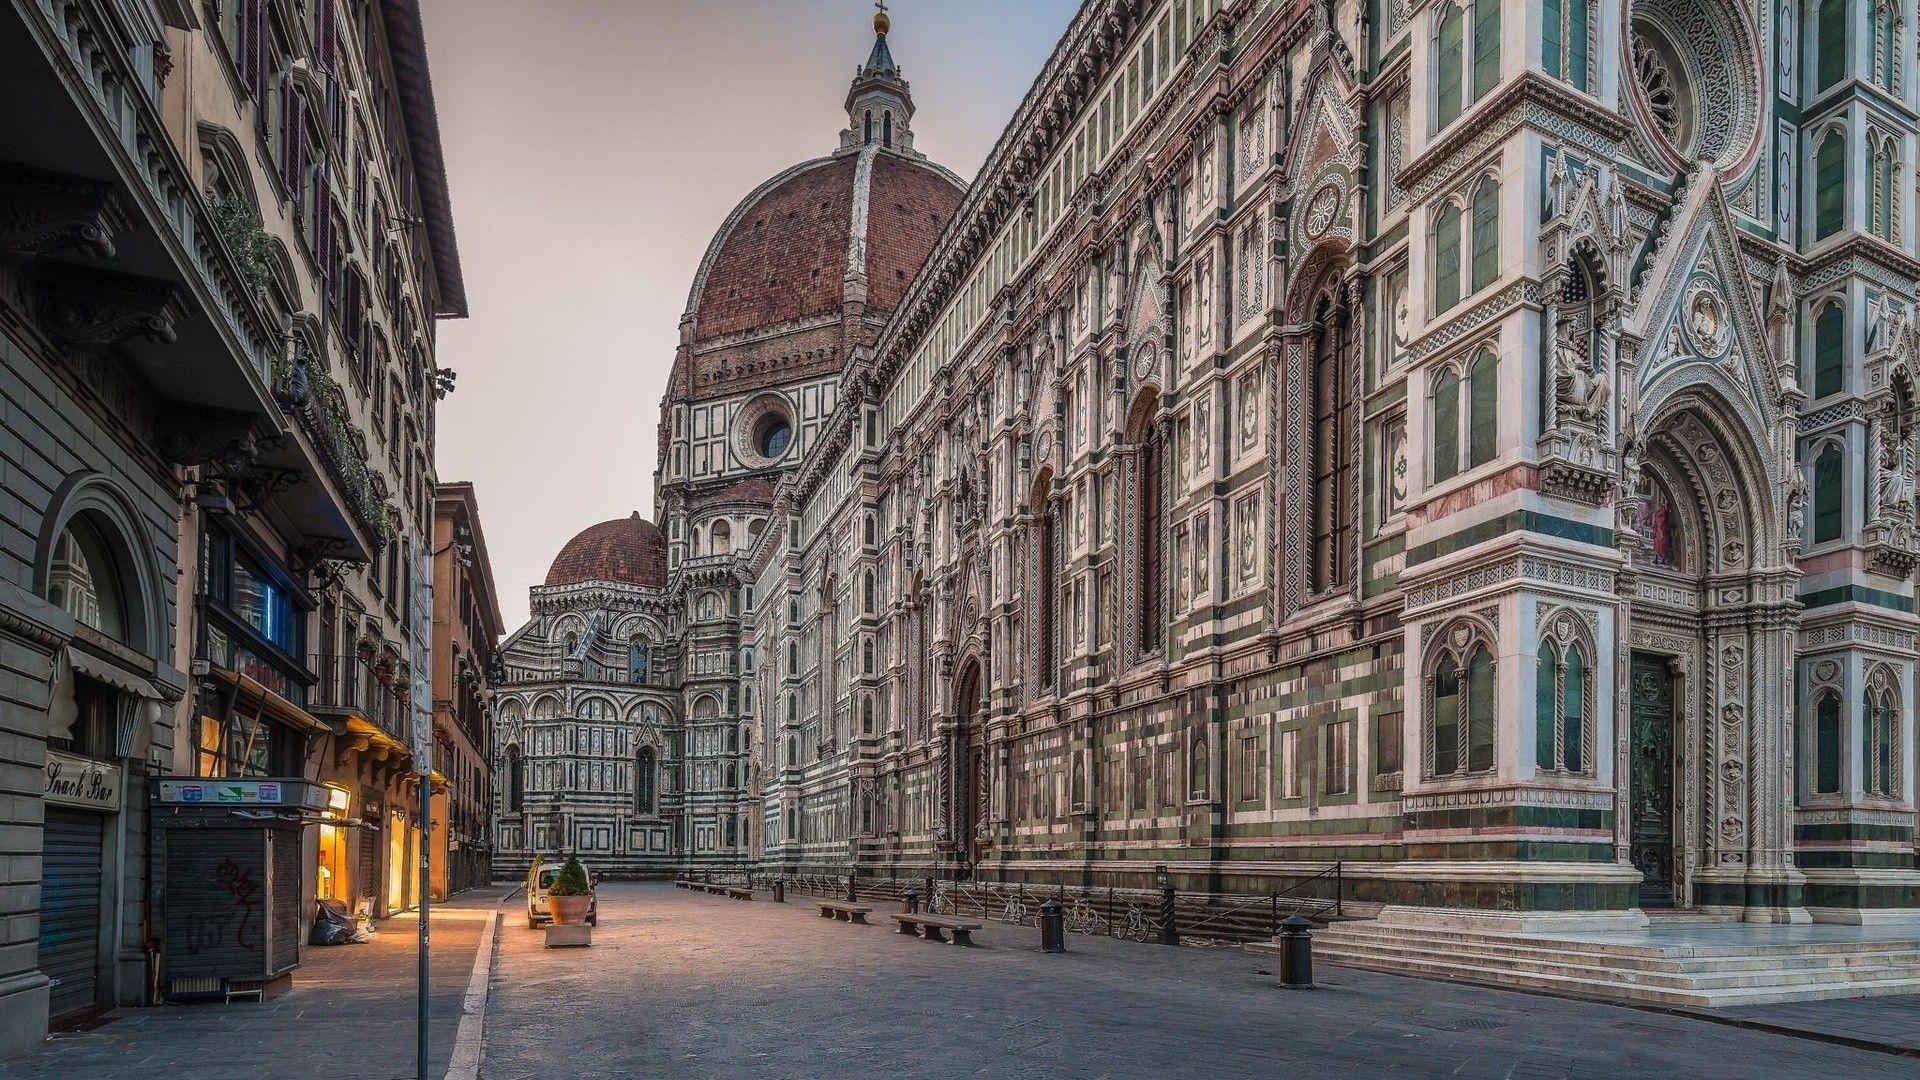 Architecture, Old Building, Town, Street, Florence, Italy, Cathedral